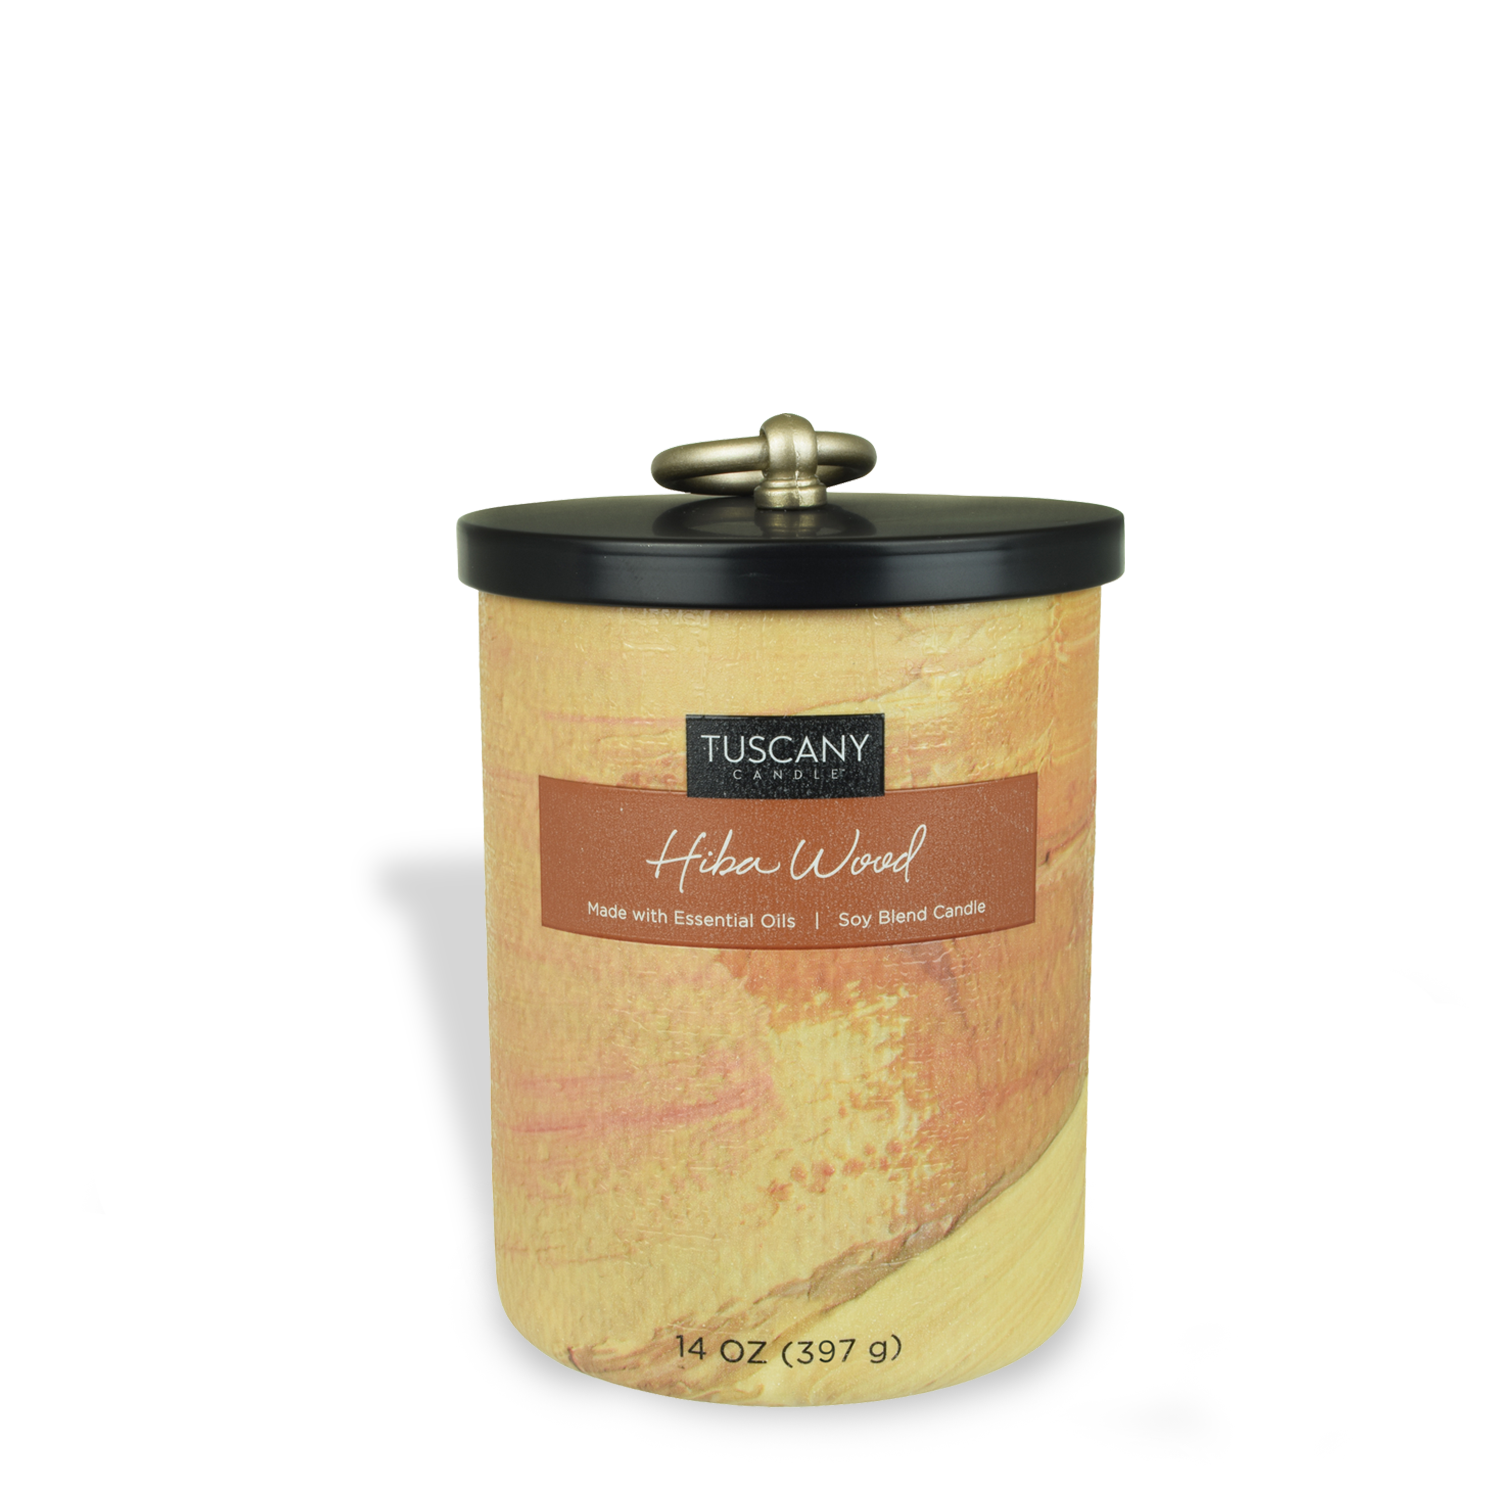 A Tuscany Candle Hiba Wood Scented Jar Candle (14 oz) - Home Décor Collection in a tin on a white background.